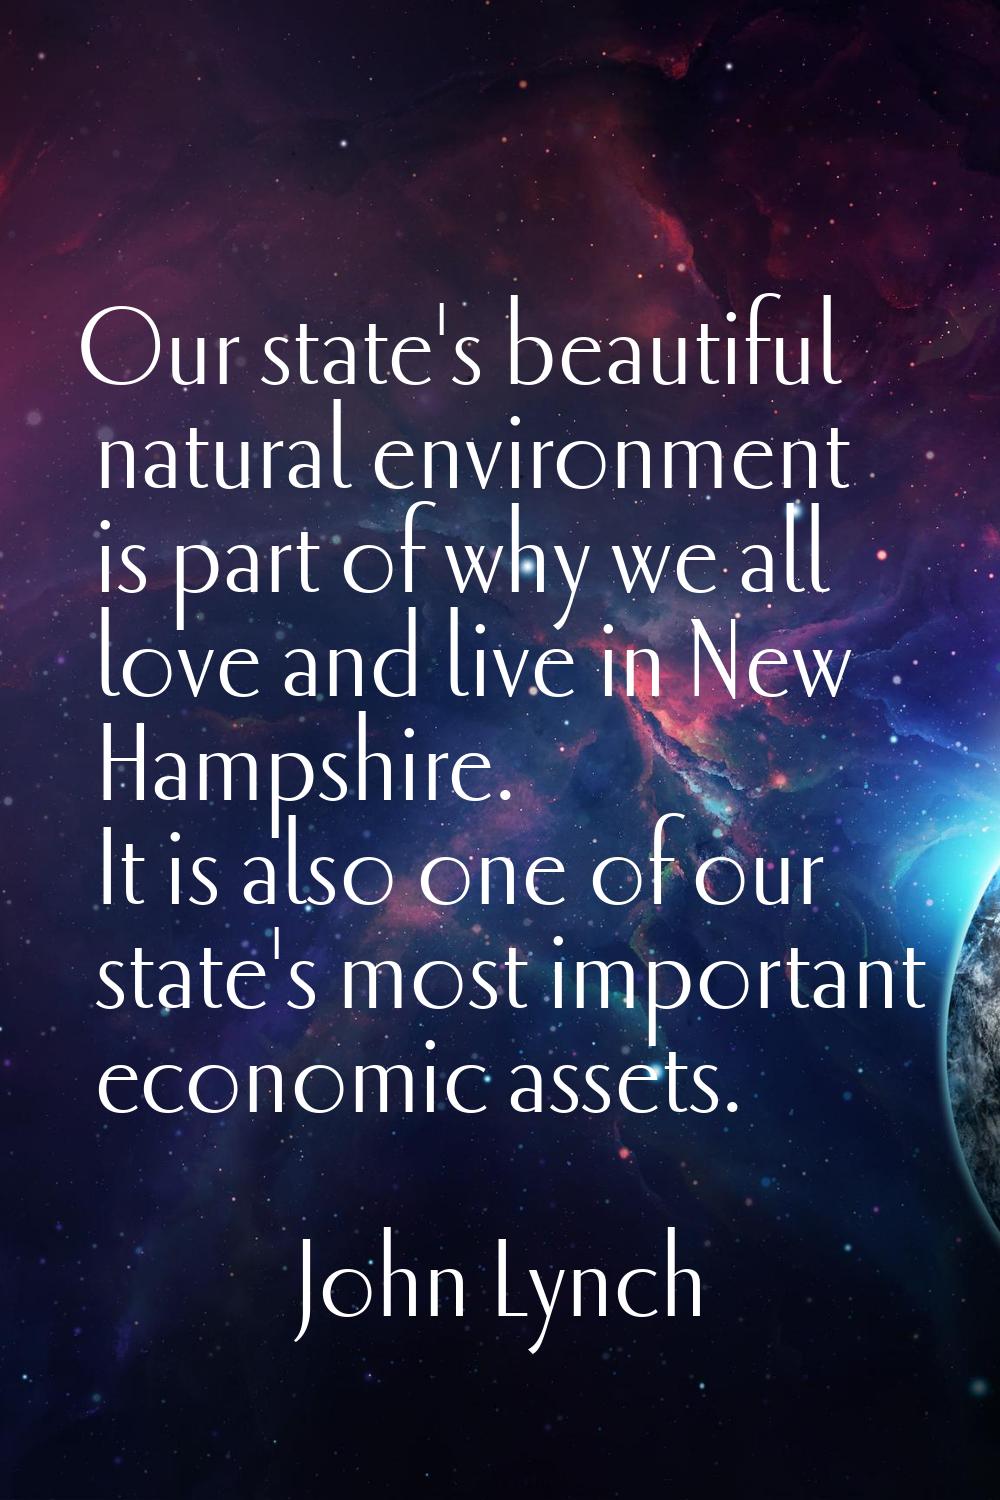 Our state's beautiful natural environment is part of why we all love and live in New Hampshire. It 